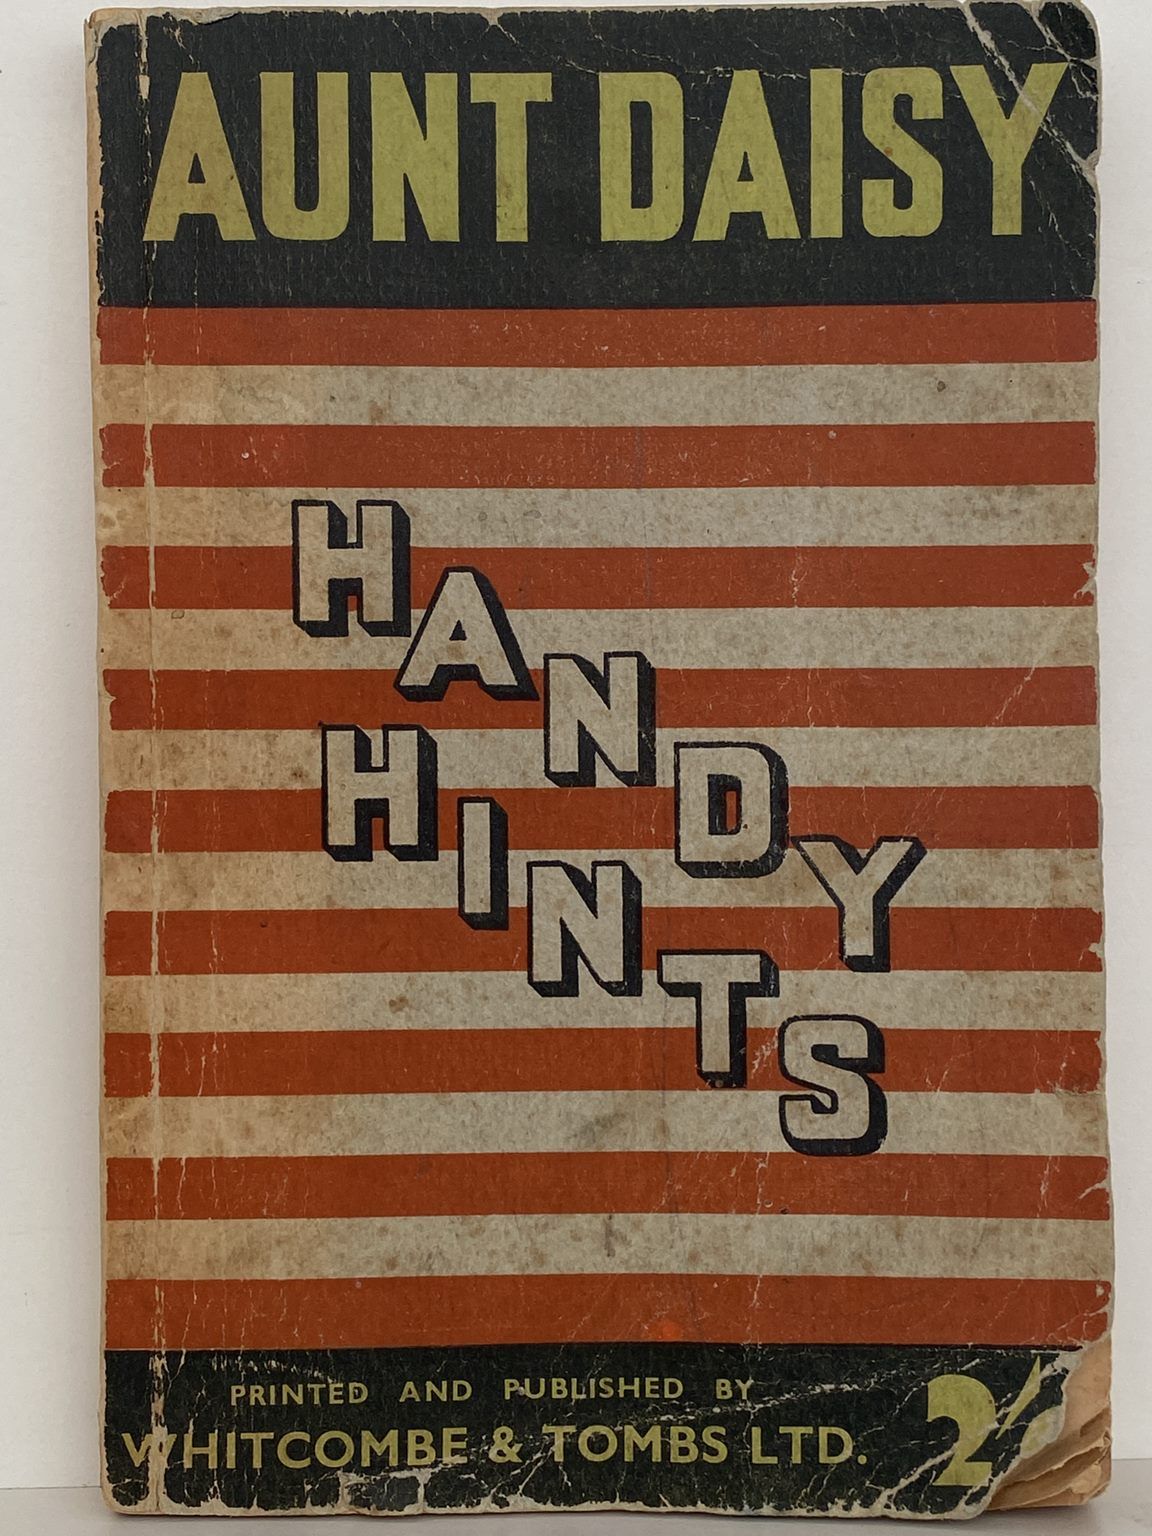 AUNT DAISY Handy Hints: Full of Valuable Hints for the Housewife